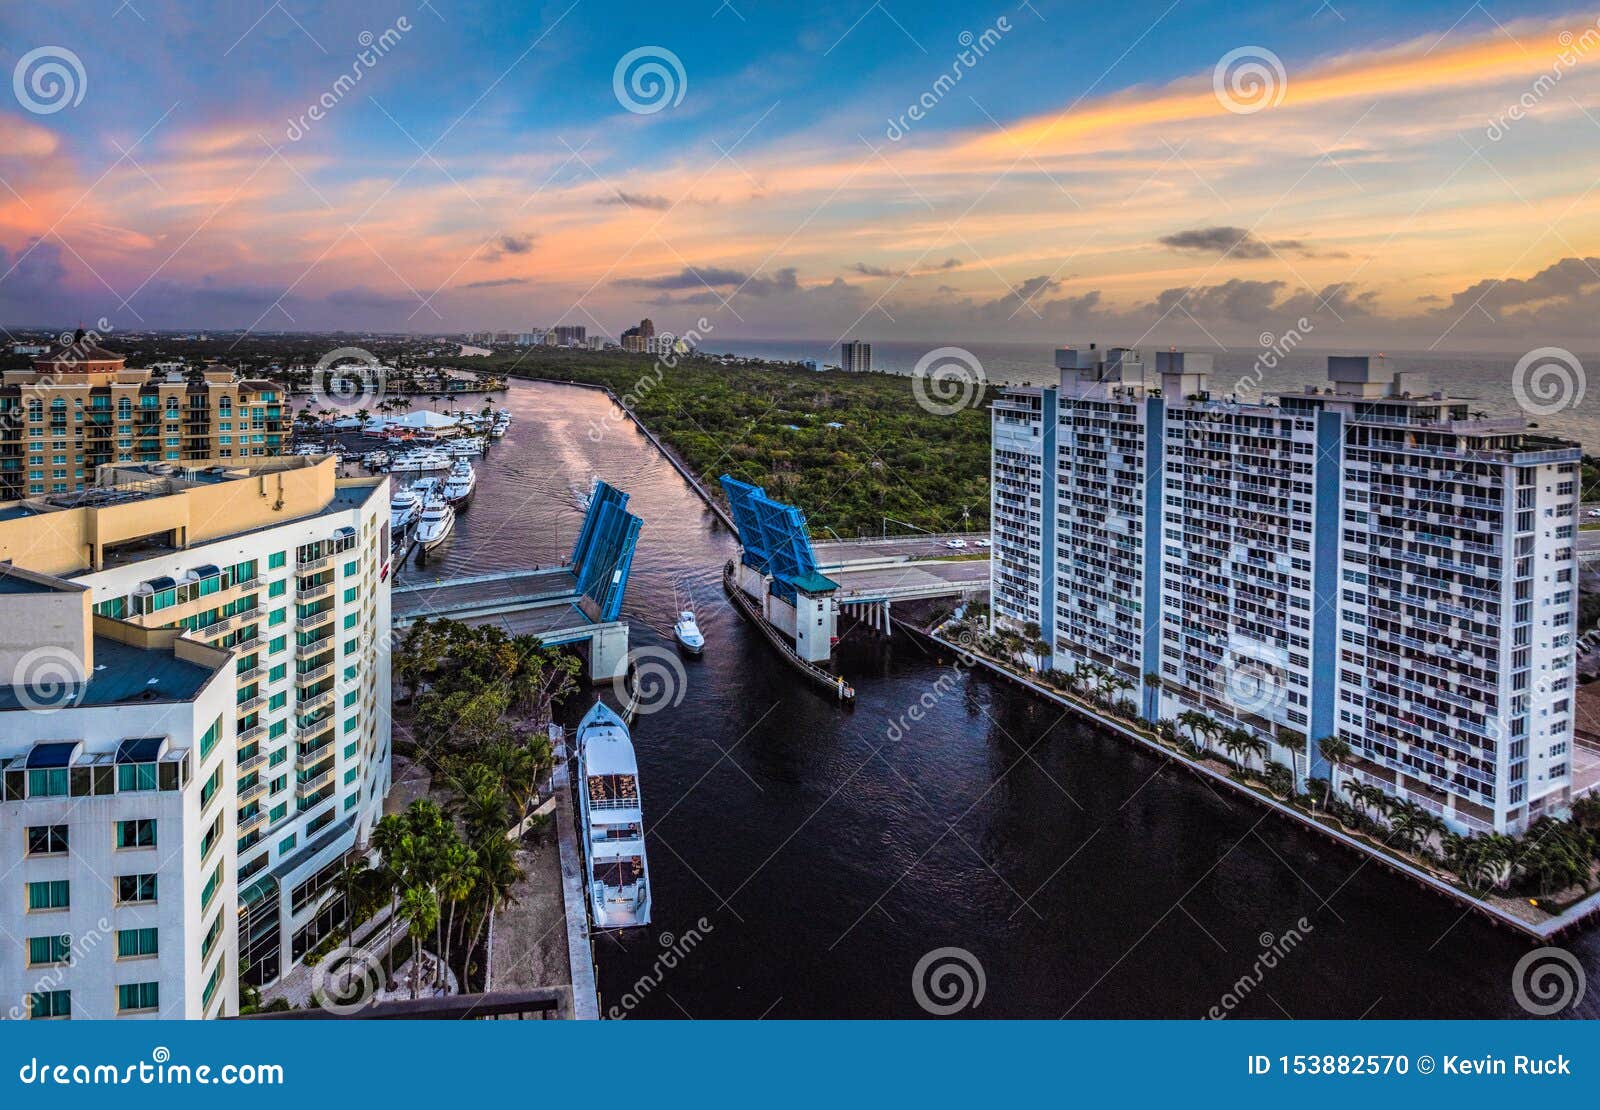 panoramic view of fort lauderdale florida and the intracoastal waterway